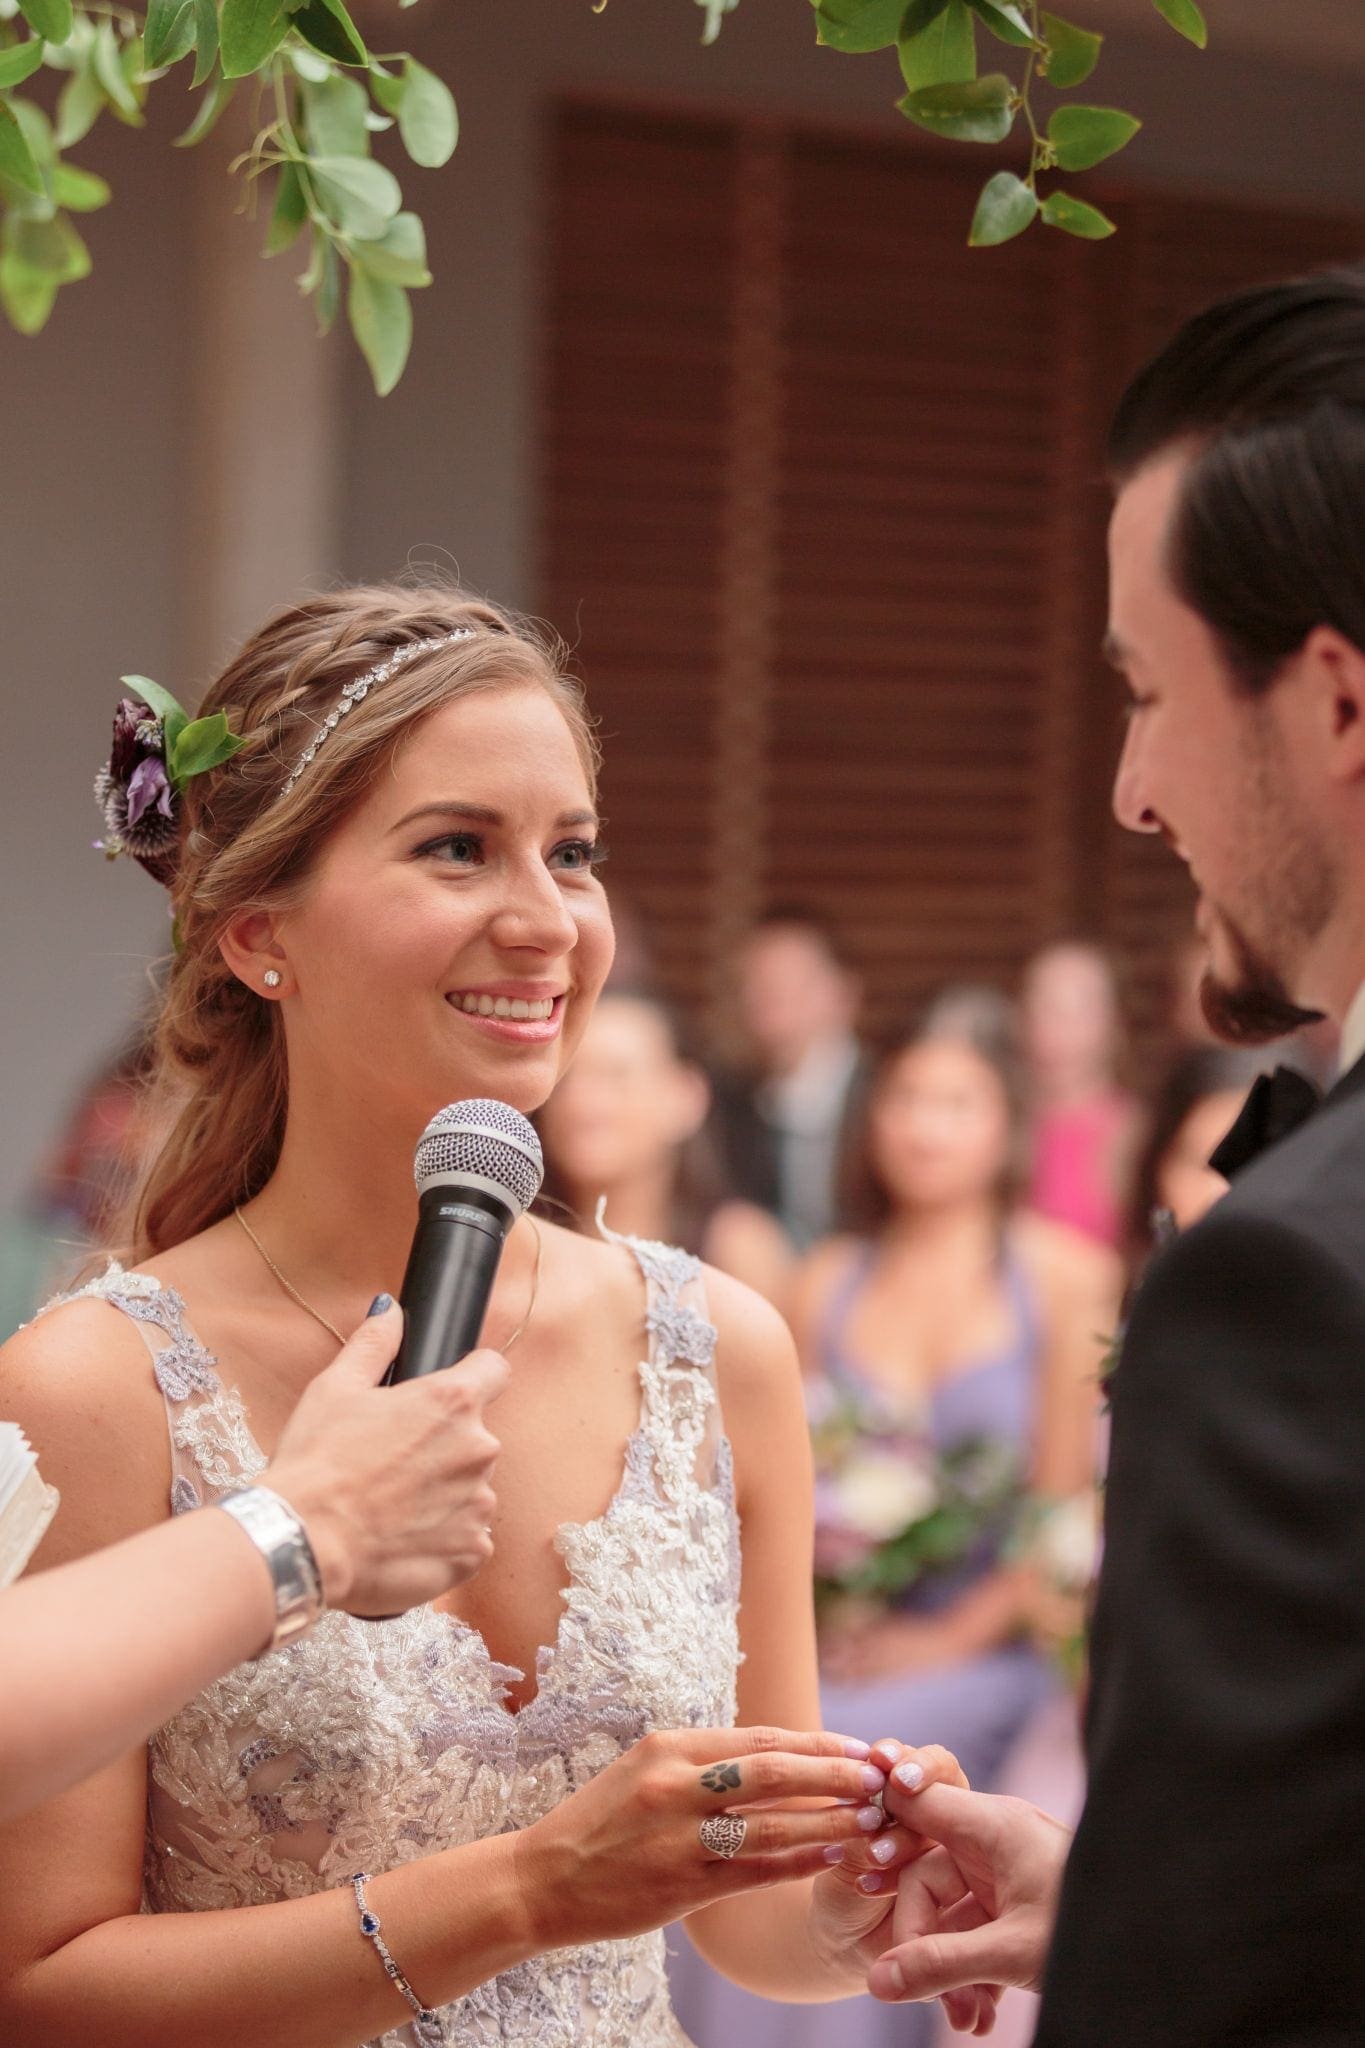 Jewish Wedding at the Joinery - Wes Craft Photography